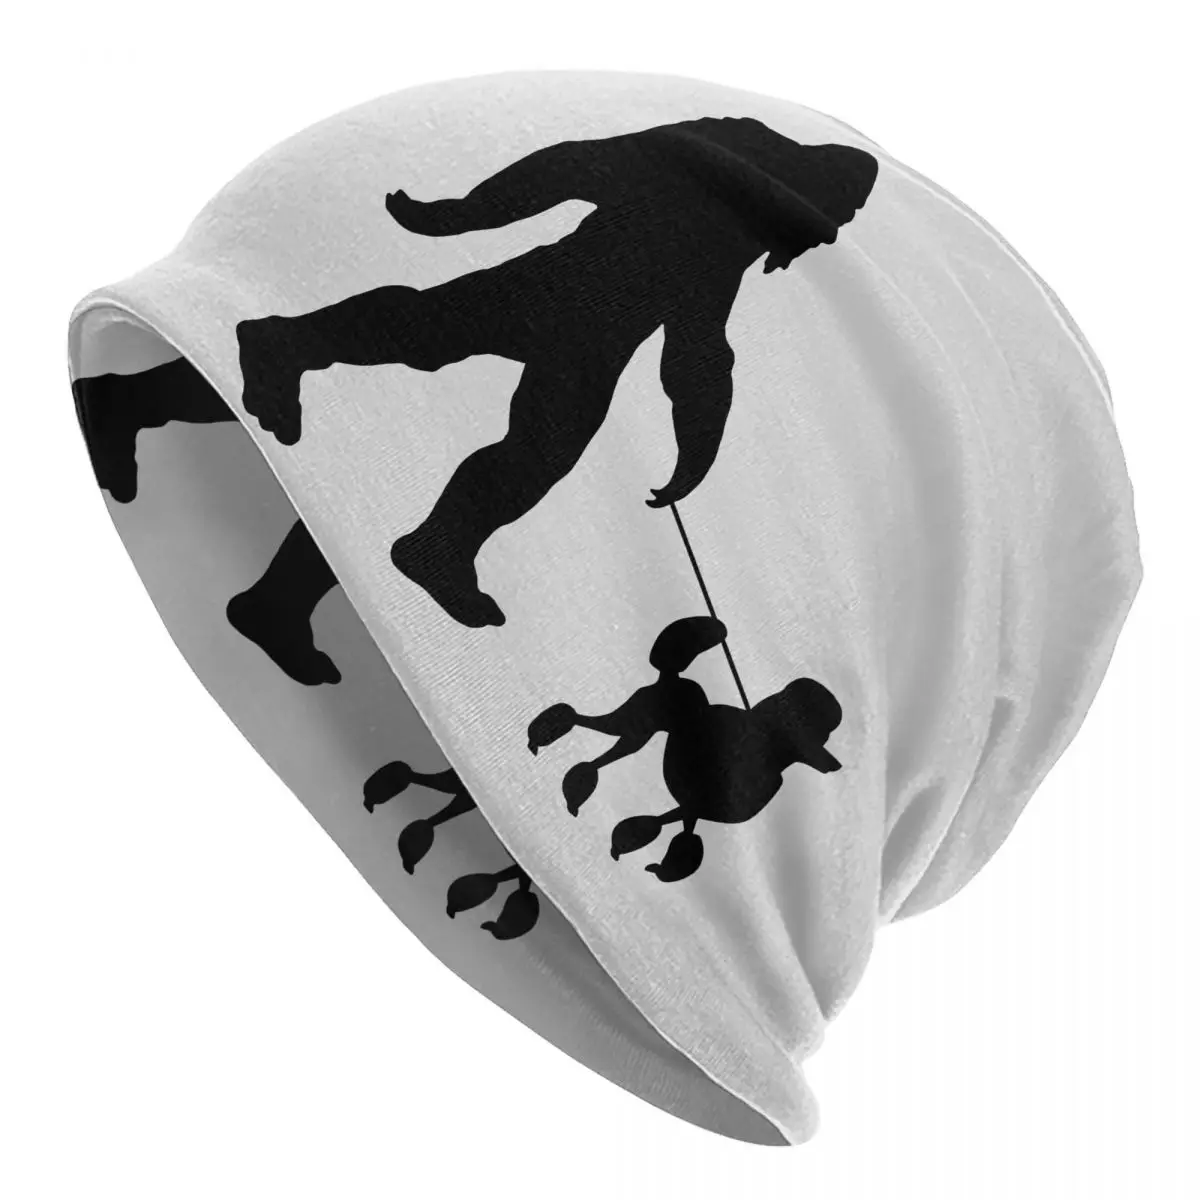 Bigfoot Walking His Dog Adult Men's Women's Knit Hat Keep warm winter Funny knitted hat